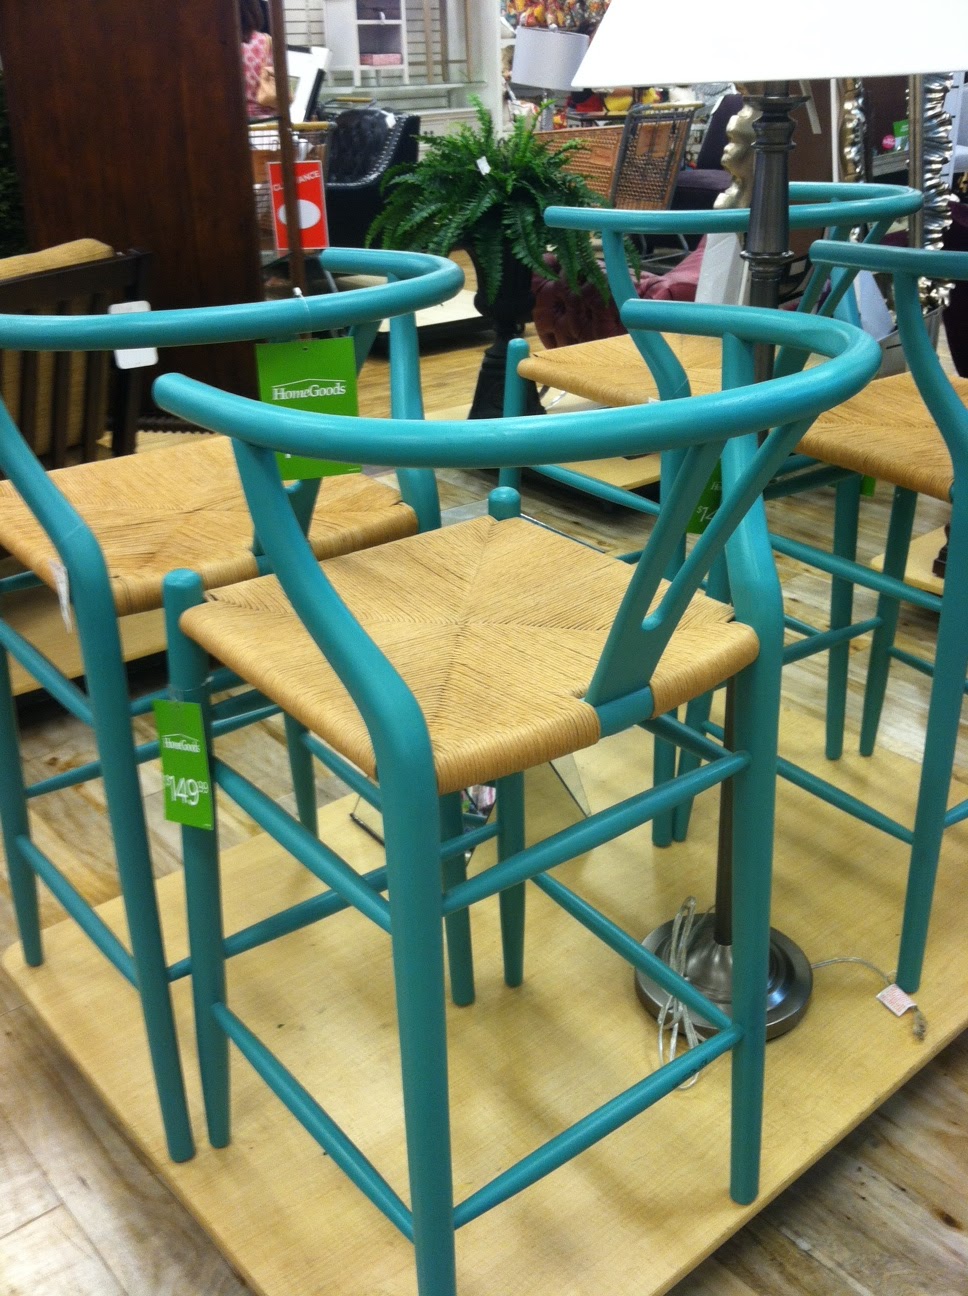 Haute Indoor Couture: Holy HomeGoods - Usually our local HomeGoods is pretty picked over so I was surprised to see  not just great pieces but whole sets like the set of 4 turquoise barstools.